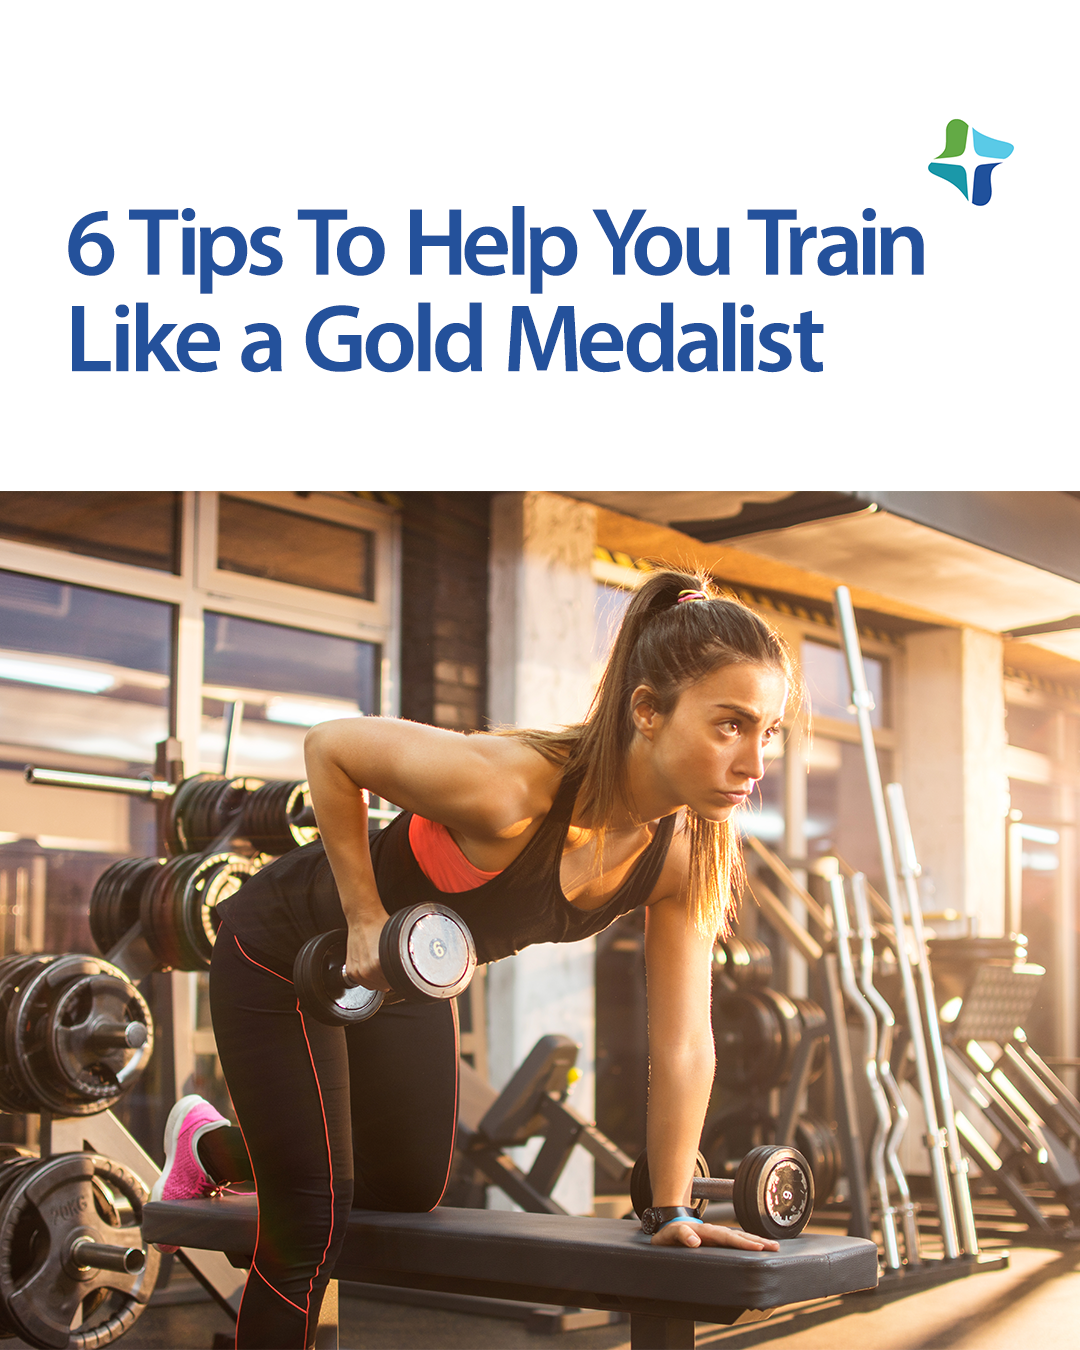 6 Tips To Help You Train Like a Gold Medalist